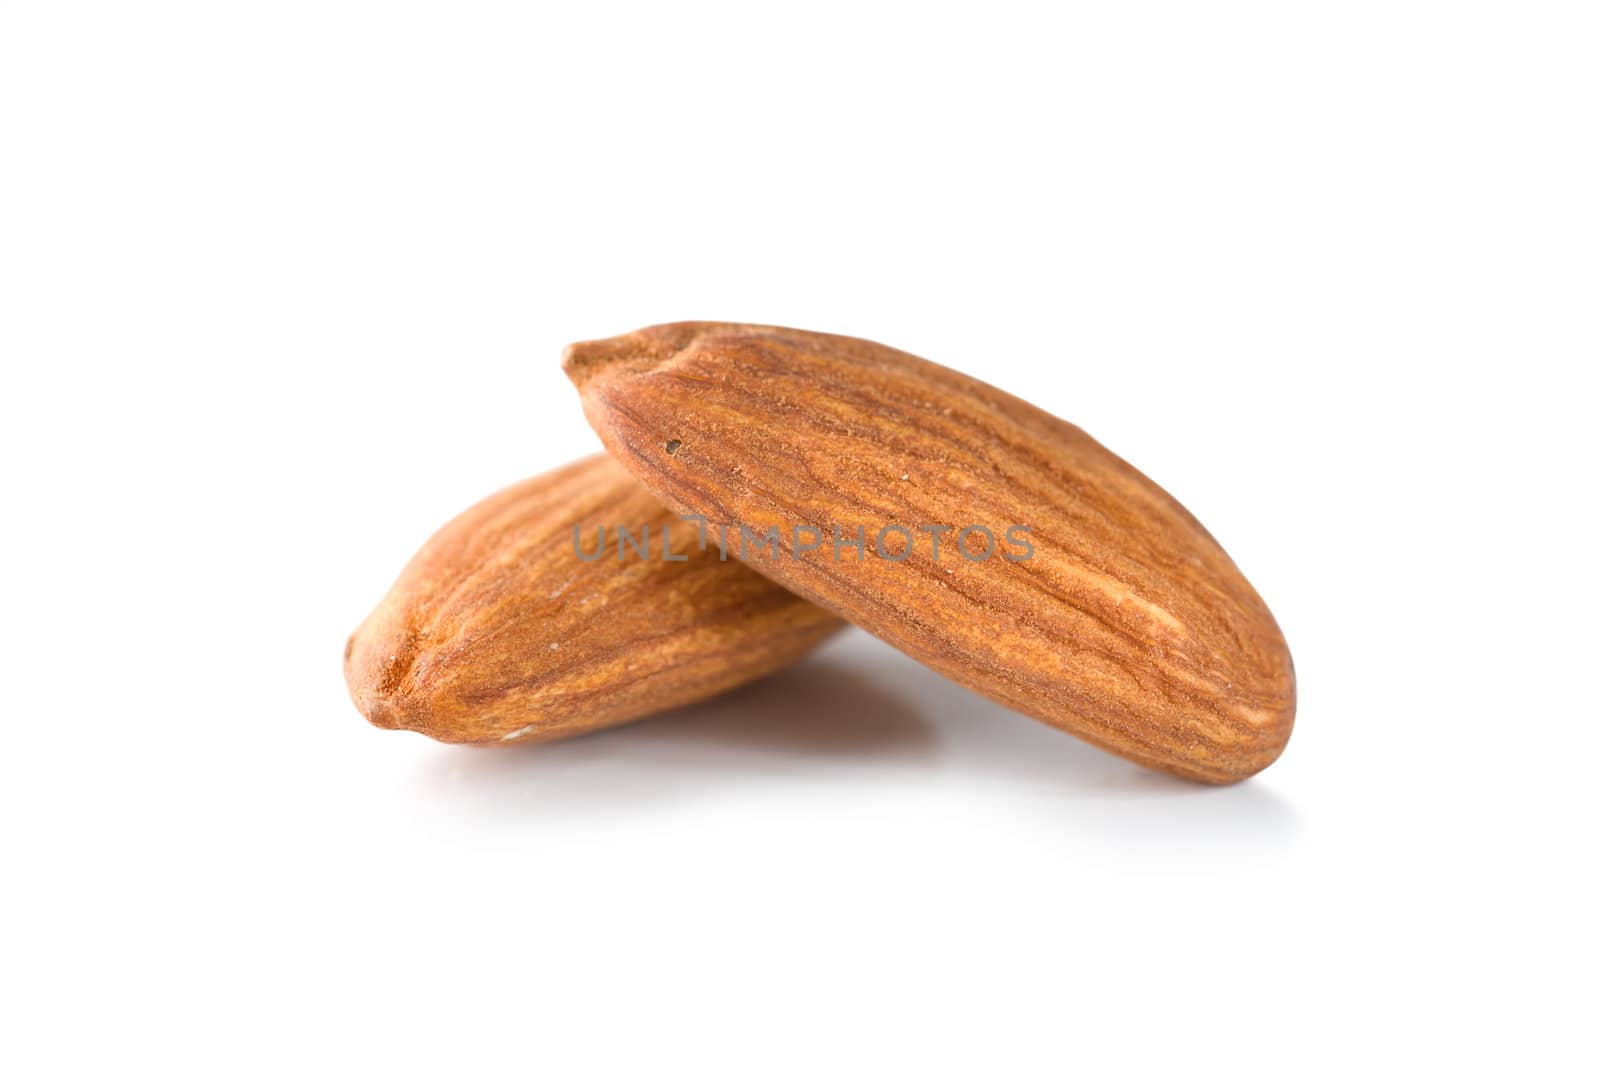 Two almond by Givaga